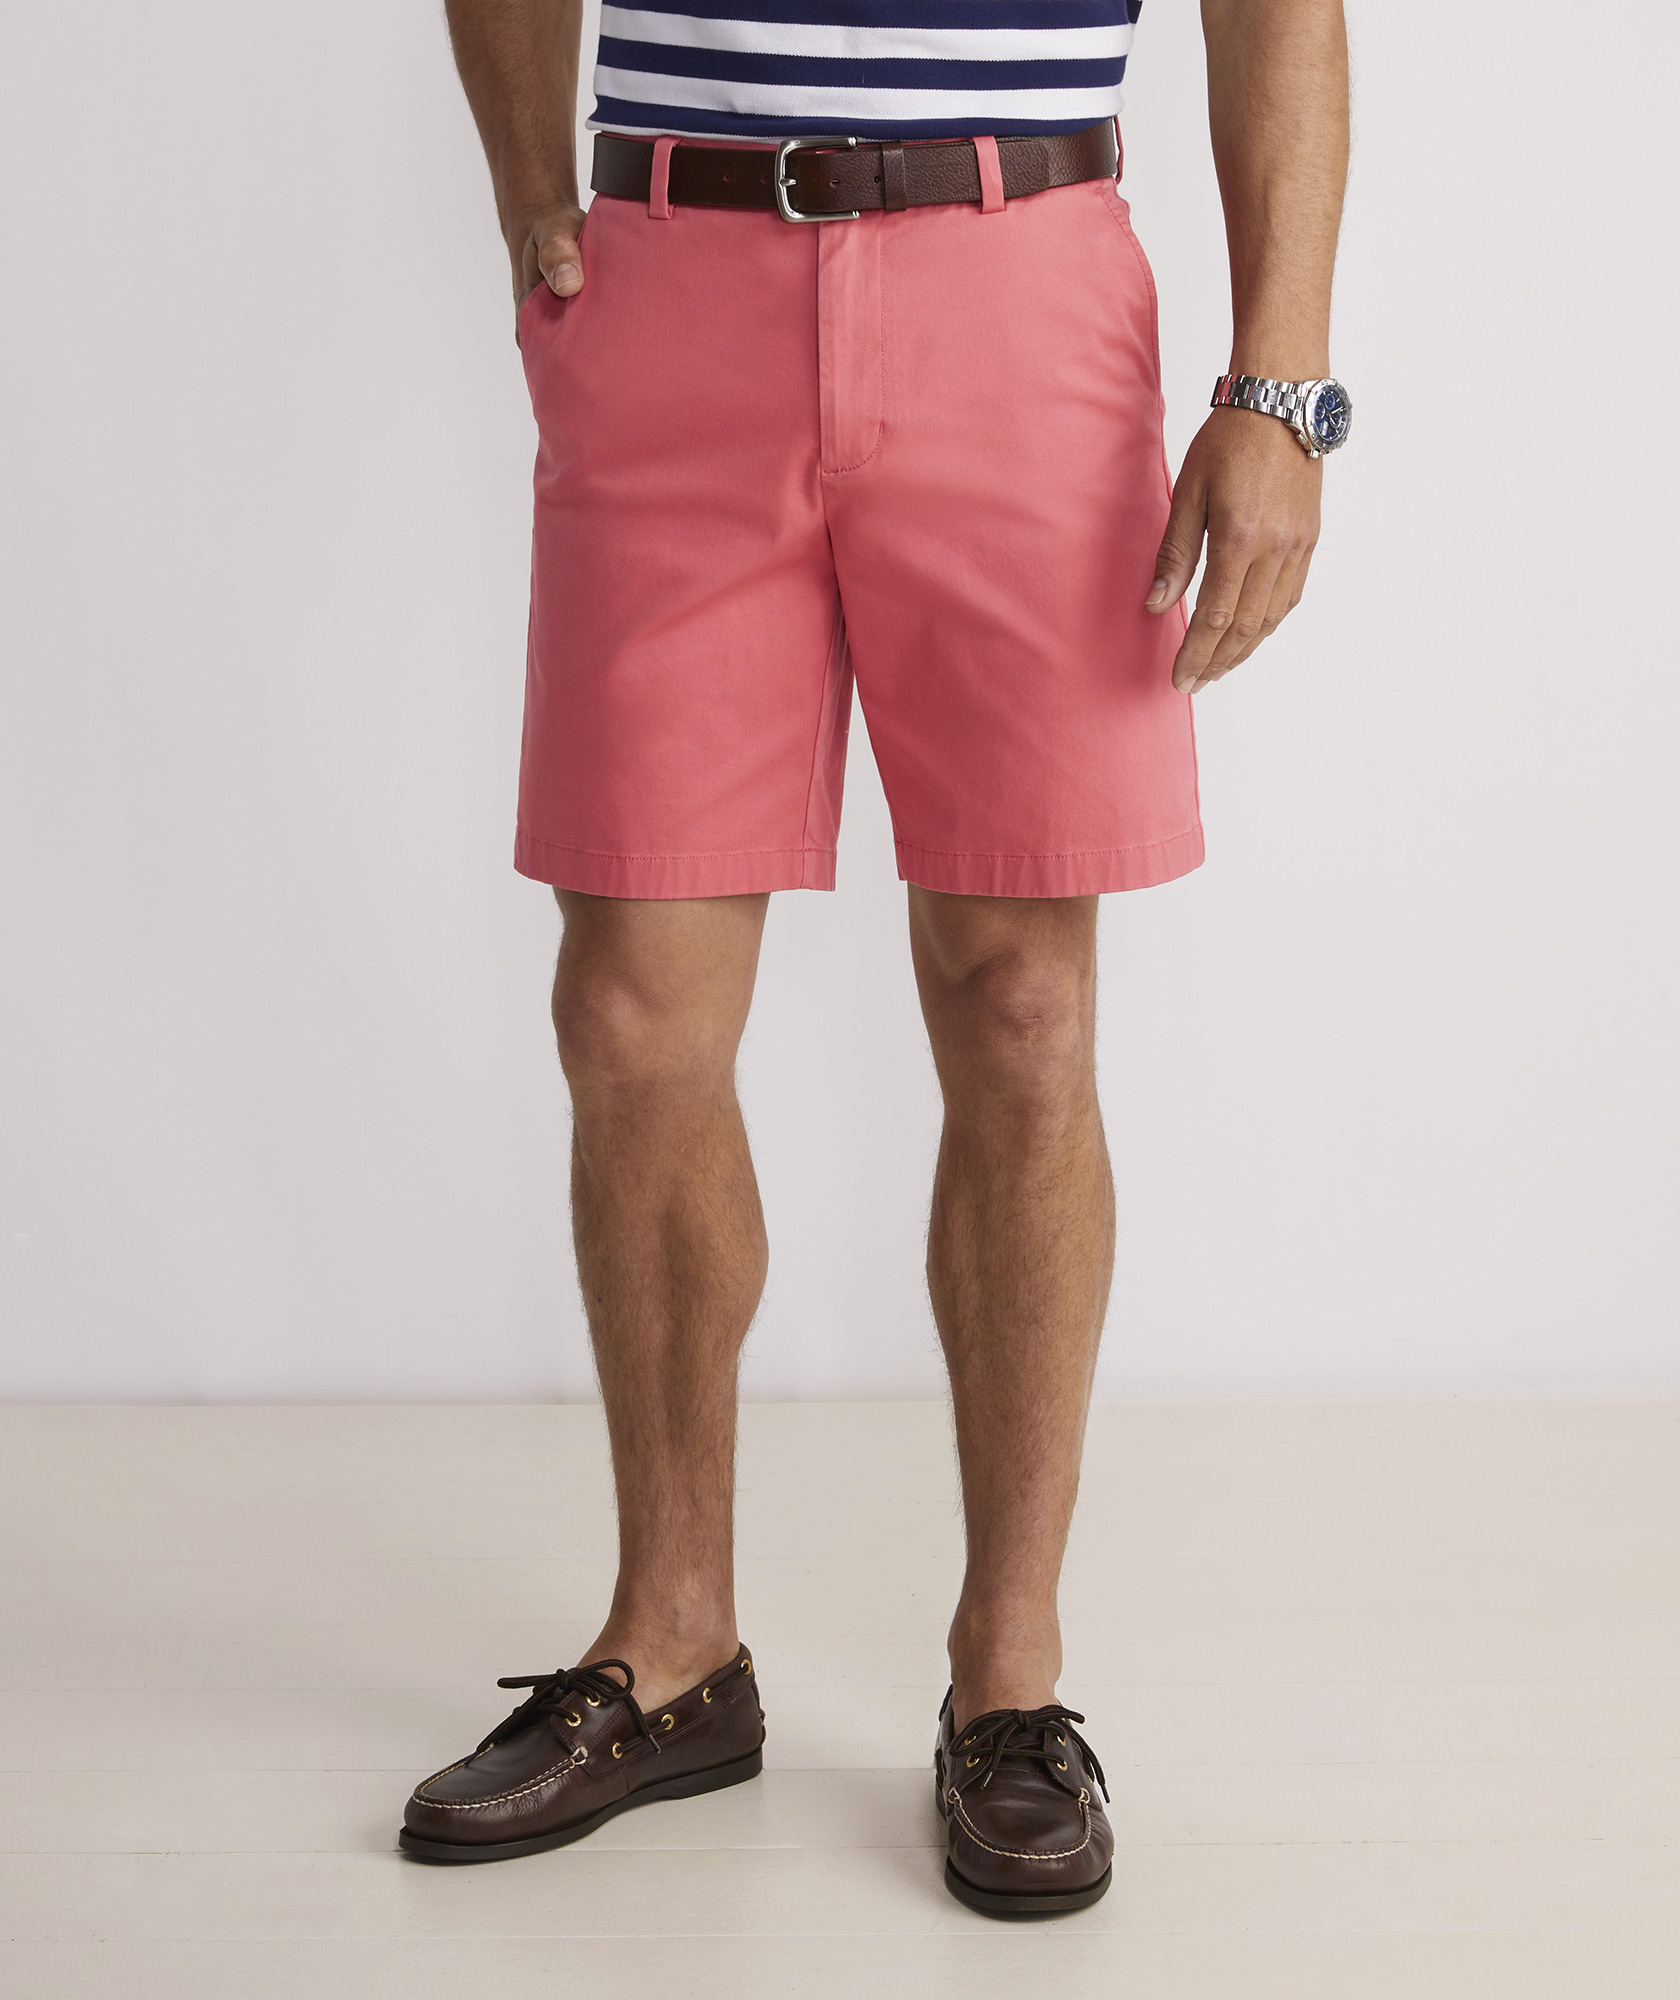 Our 5 Favorite vineyard vines Menswear Classics For The Holiday Season